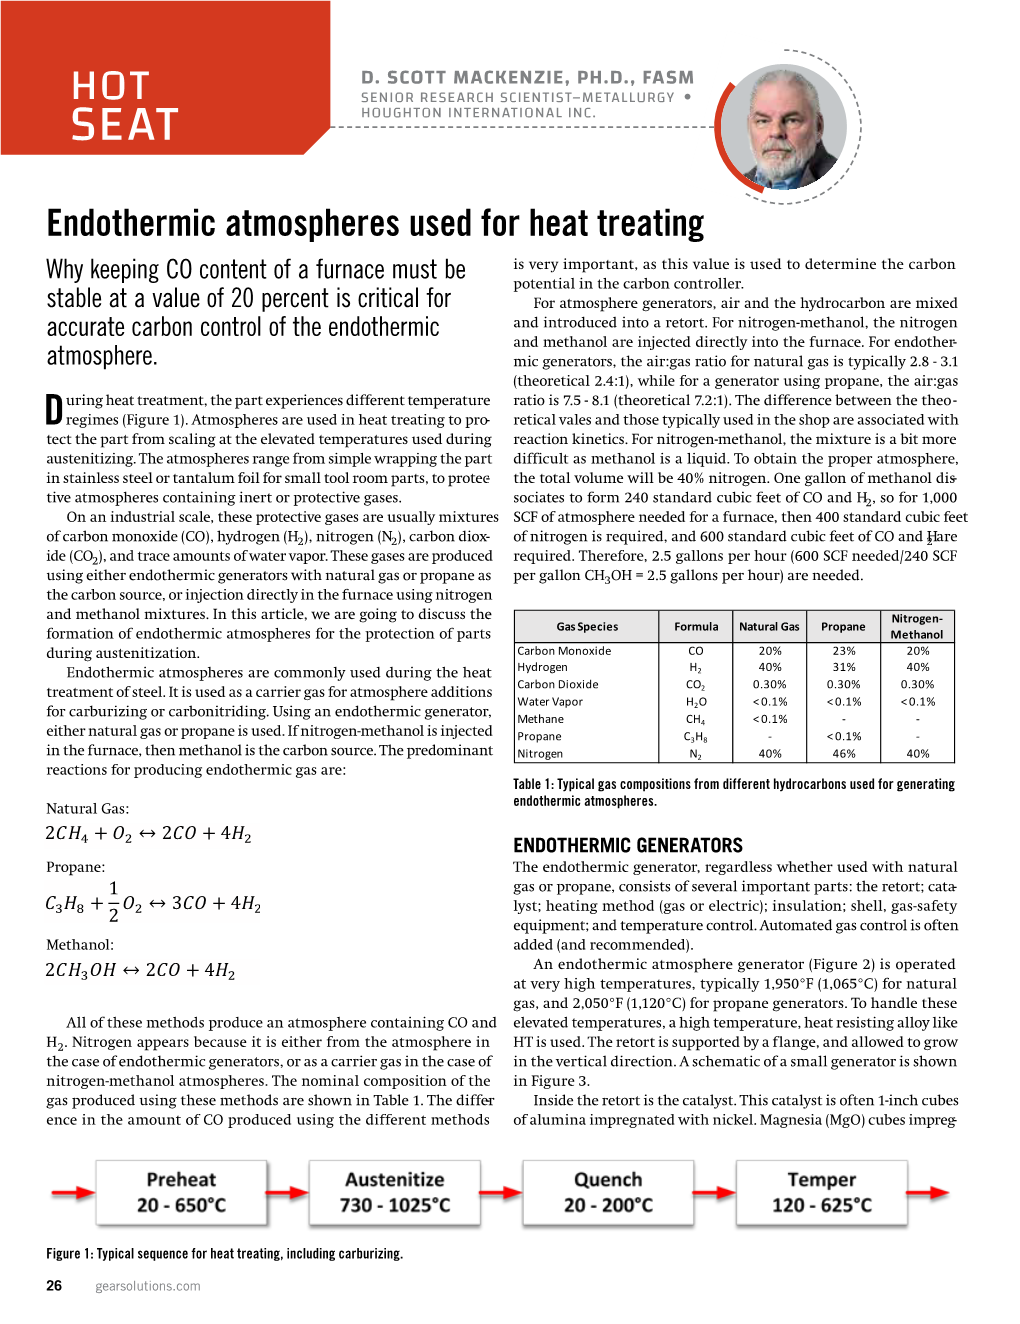 Endothermic Atmospheres Used for Heat Treating Why Keeping CO Content of a Furnace Mustd